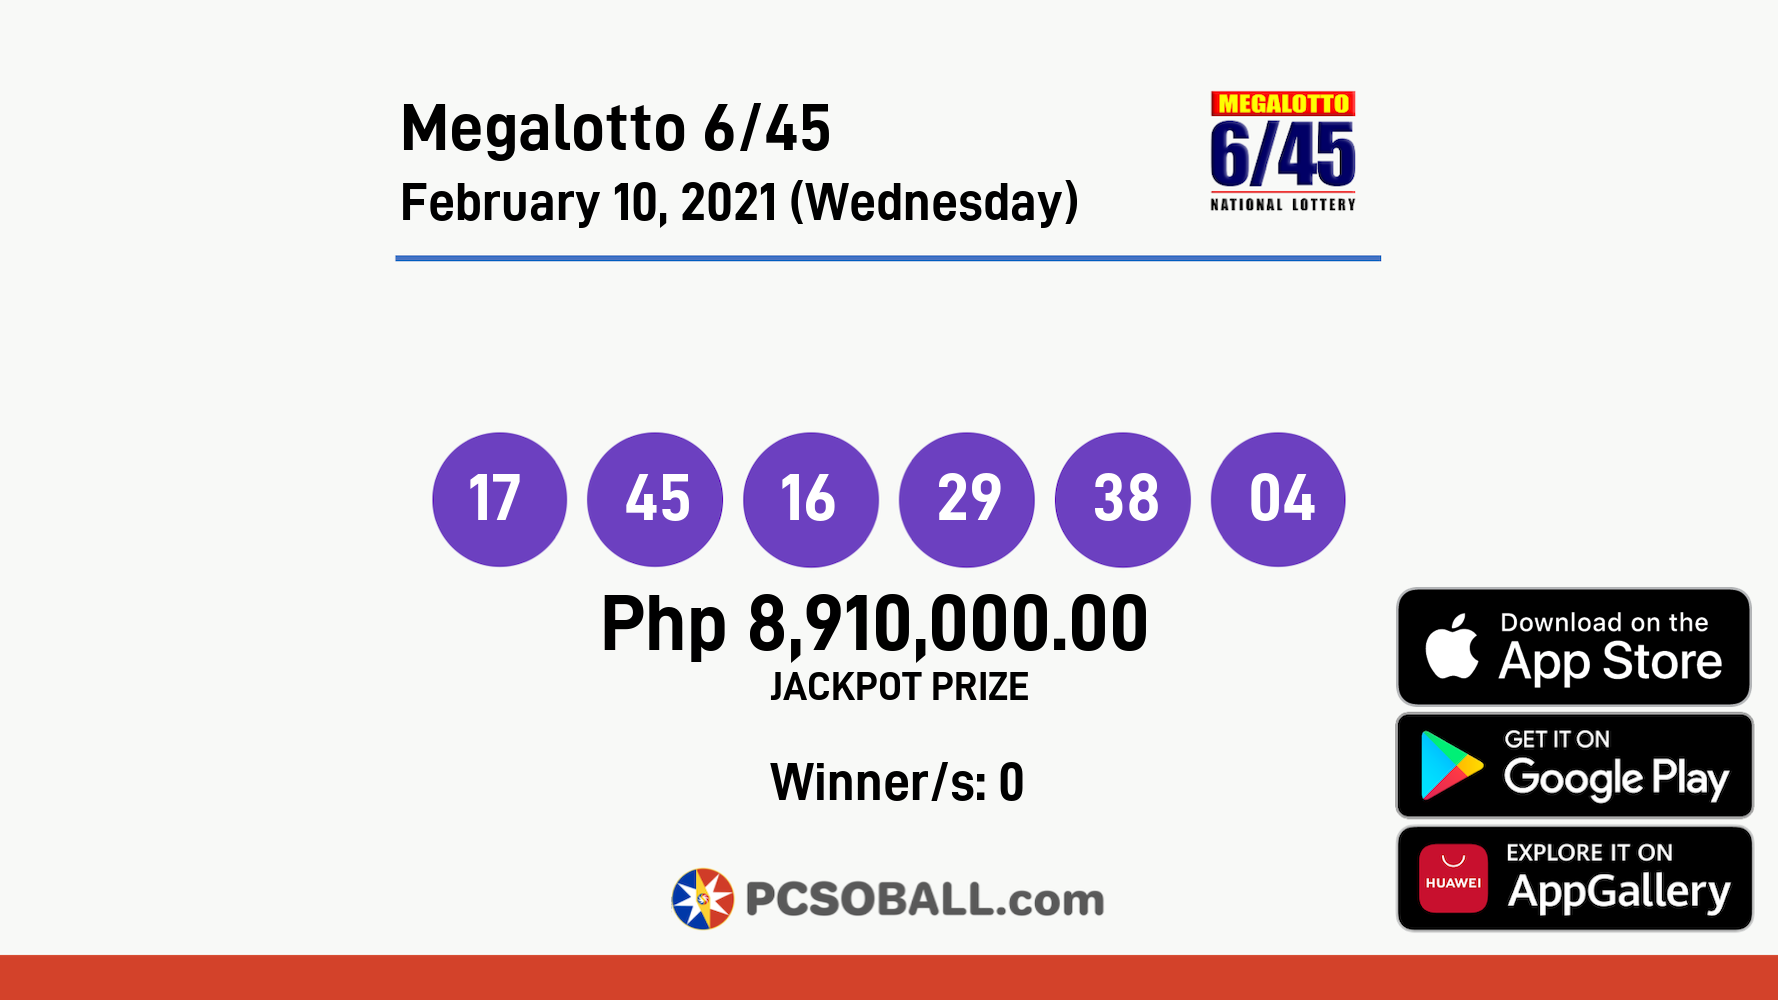 Megalotto 6/45 February 10, 2021 (Wednesday) Result